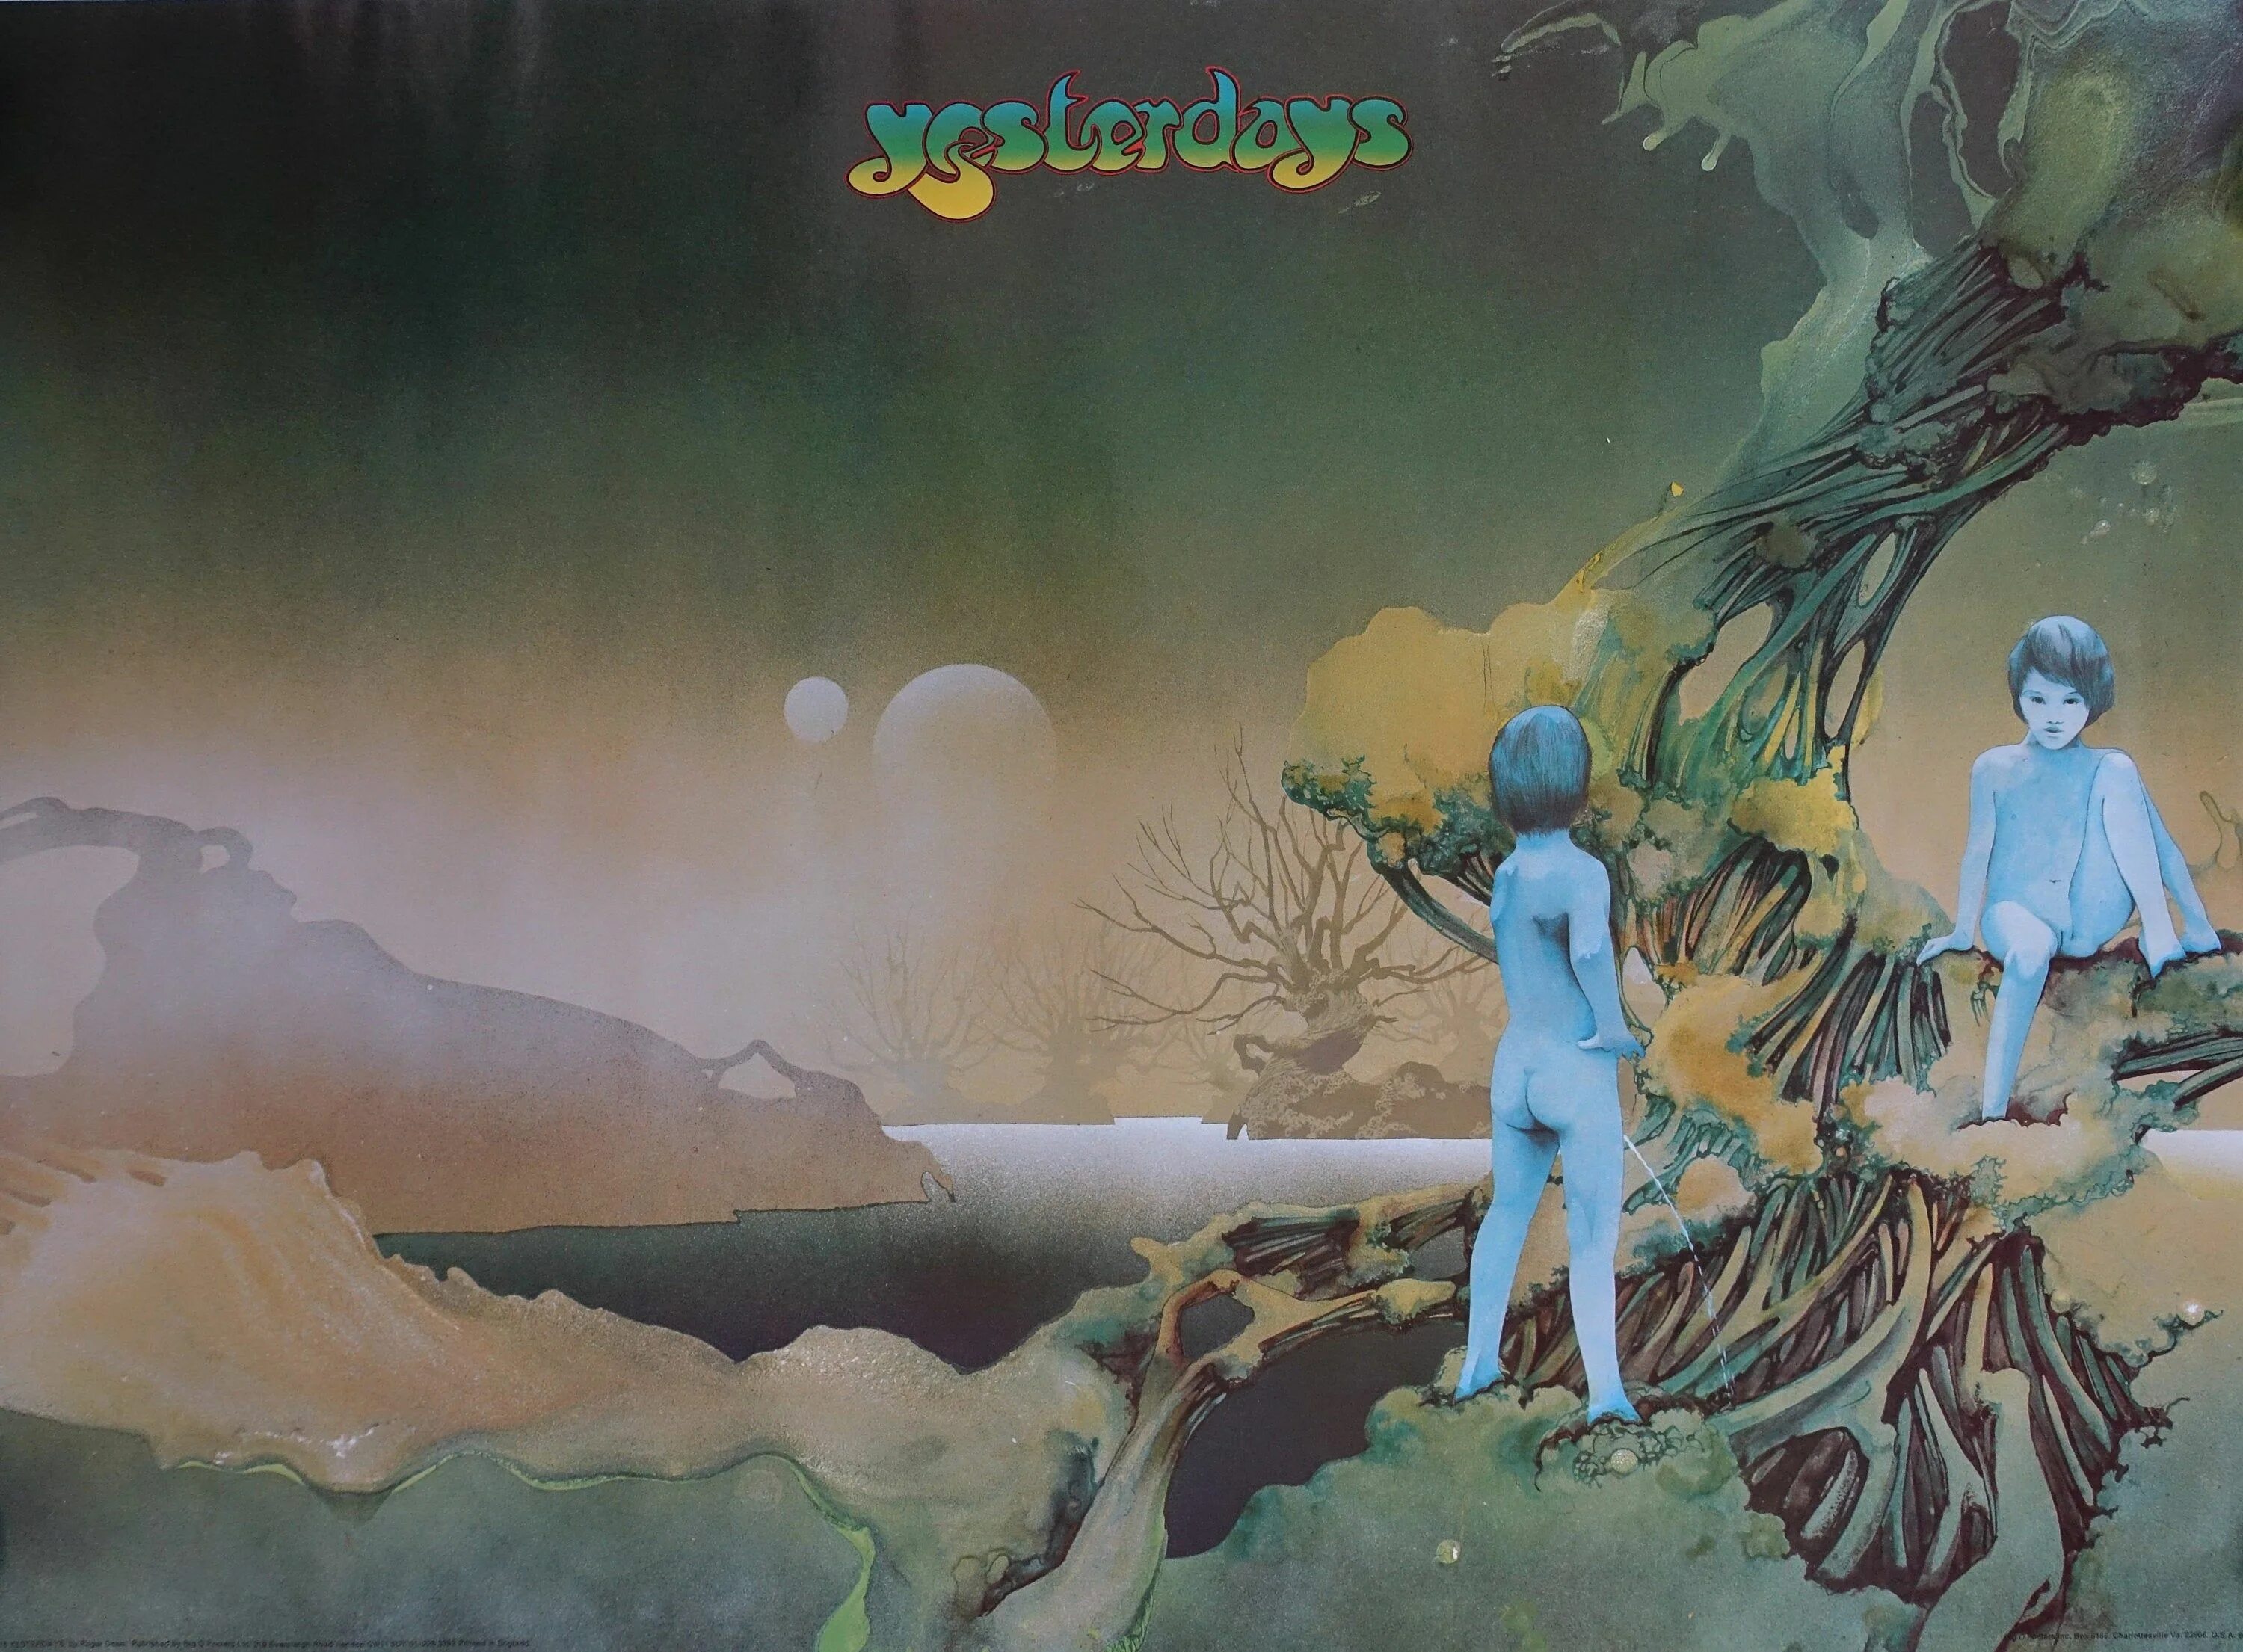 Roger Dean album Covers. Yes yesterdays 1974. The world of yesterday